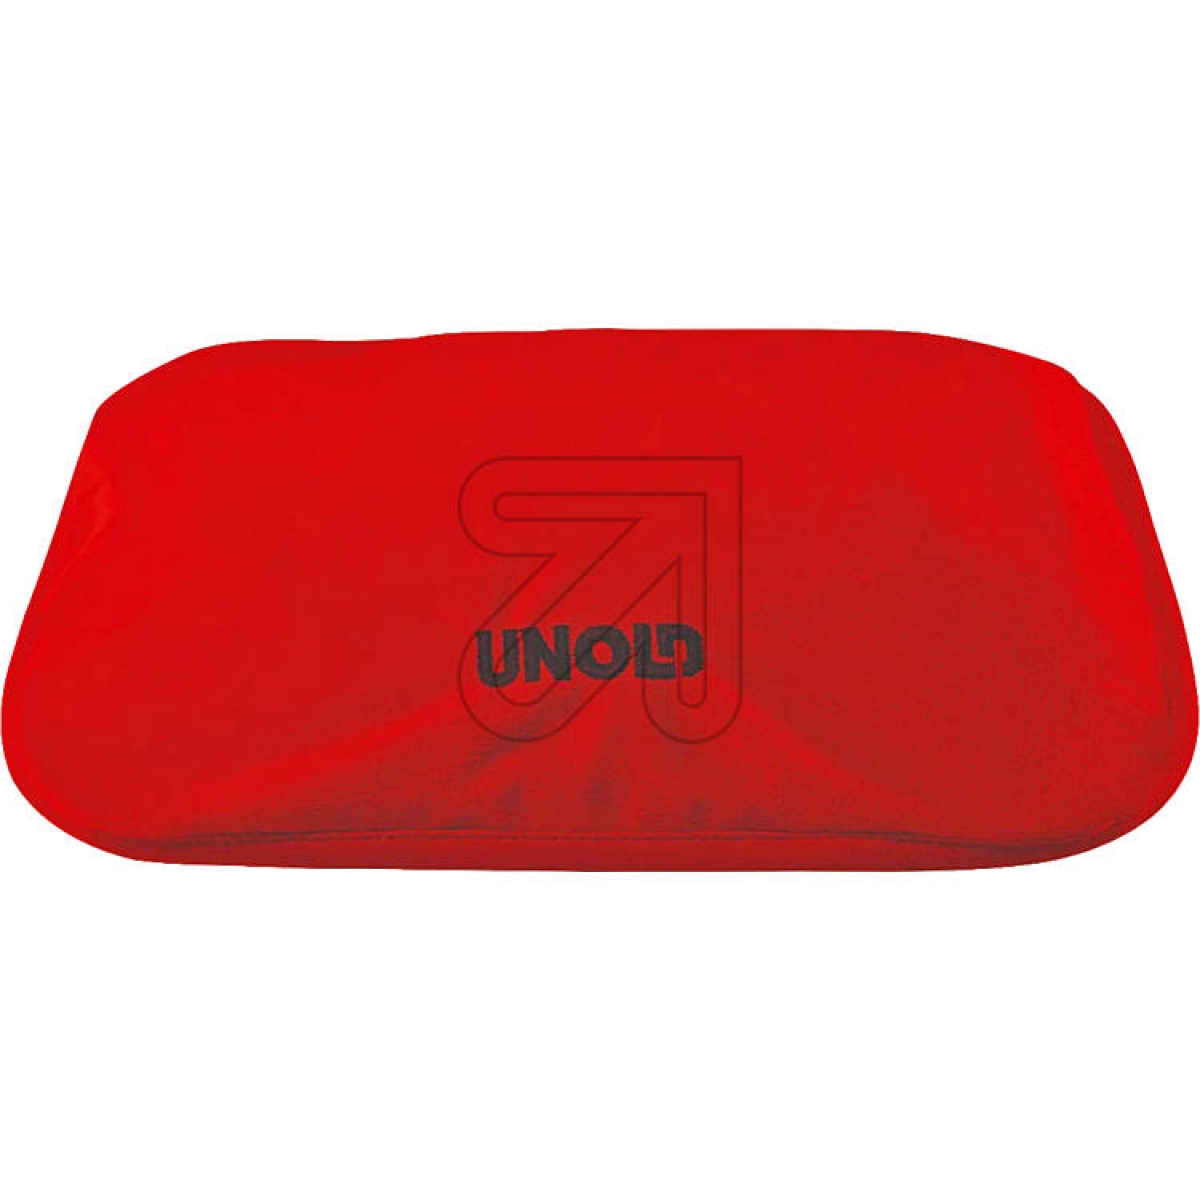 UnoldElectric hot water bottle Unold 86013 redArticle-No: 436480